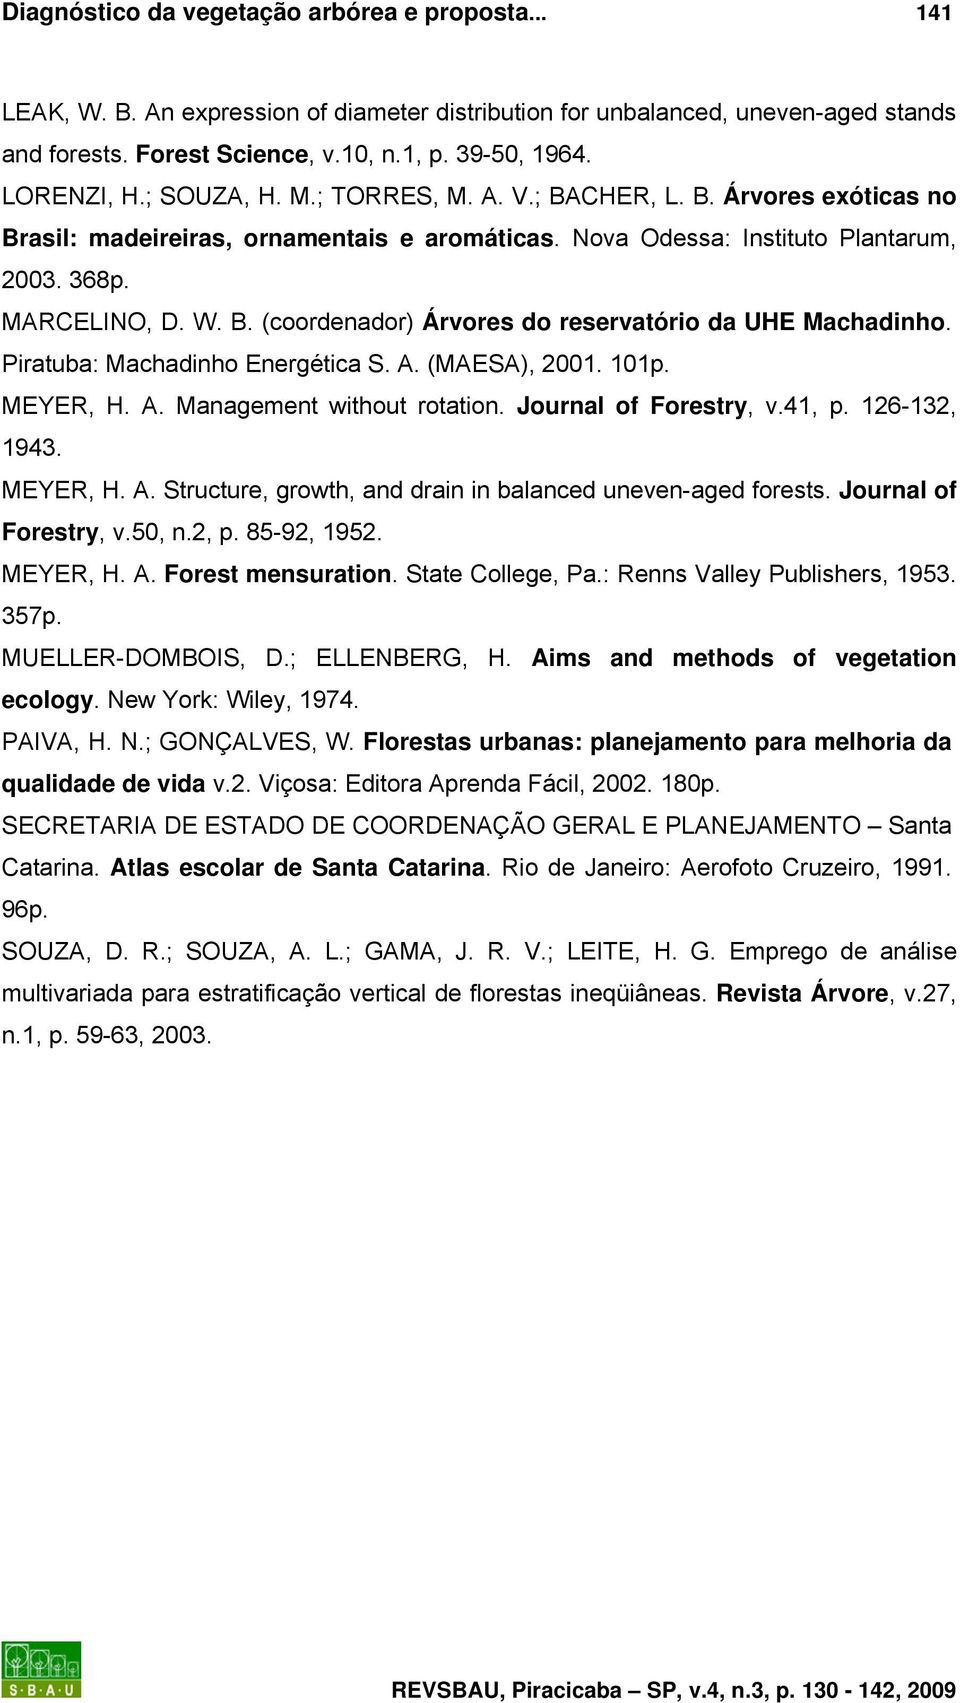 Piratuba: Machadinho Energética S. A. (MAESA), 2001. 101p. MEYER, H. A. Management without rotation. Journal of Forestry, v.41, p. 126-132, 1943. MEYER, H. A. Structure, growth, and drain in balanced uneven-aged forests.